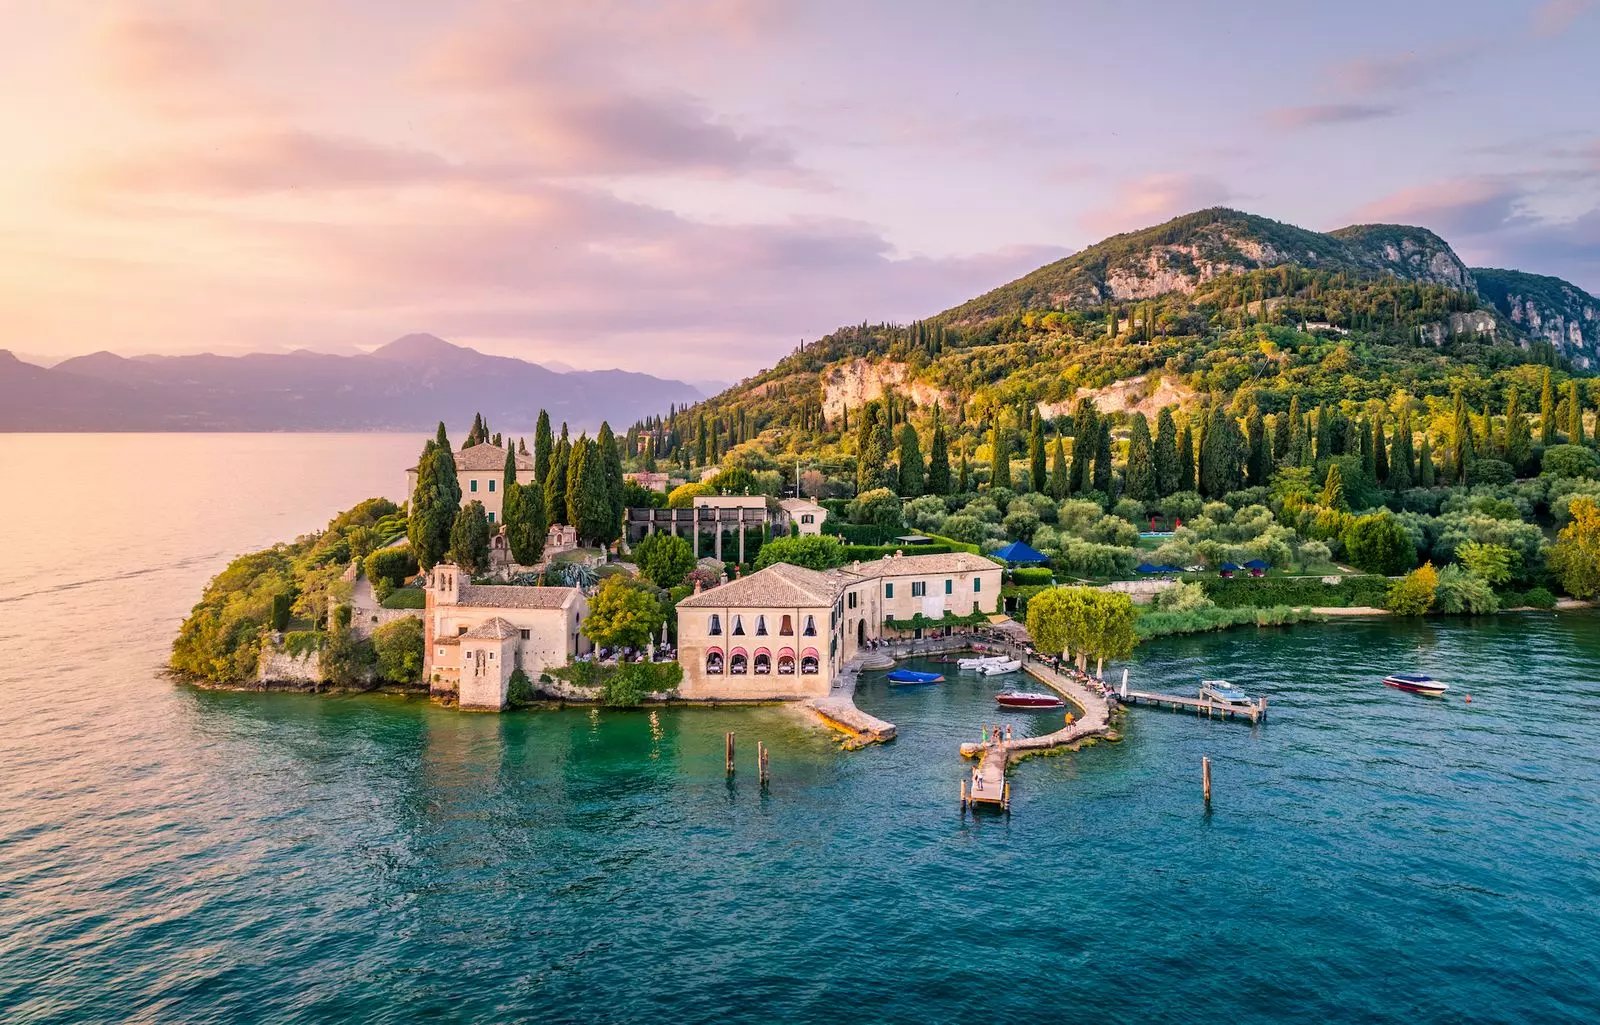 Lake Garda, Italy, - Itinerary, Attractions, Cities, Things to do